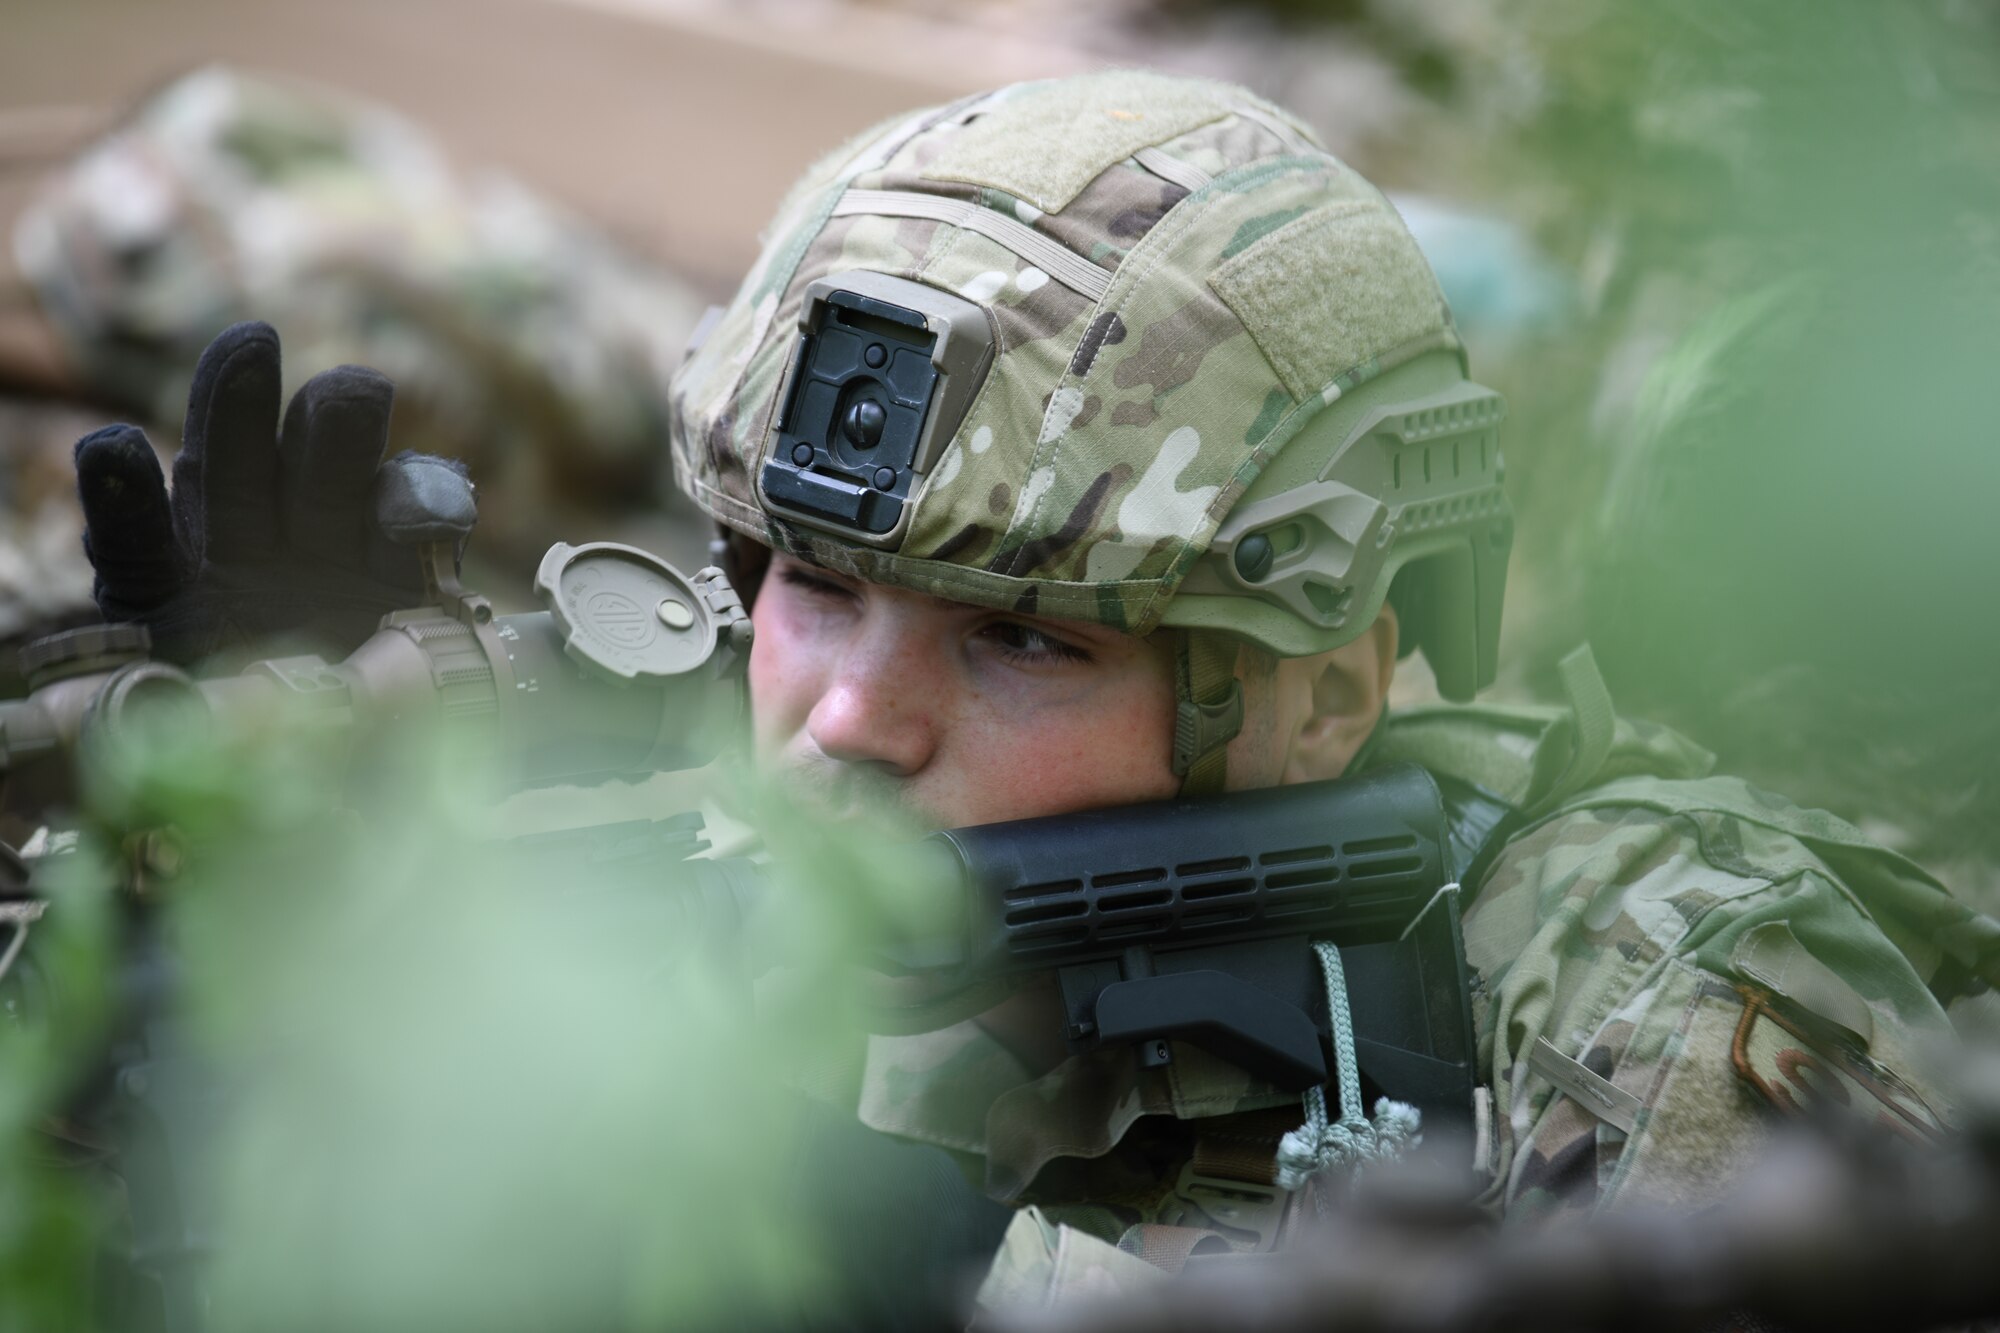 Airman 1st Class Keven Zielenski, a member of the 439th Security Forces Squadron, Westover Air Reserve Base, Massachusetts, hones his rifle sight during a static defense exercise at the Integrated Defense Leadership Course at Camp James A. Garfield Joint Military Training Center, Ohio, May 19, 2023.